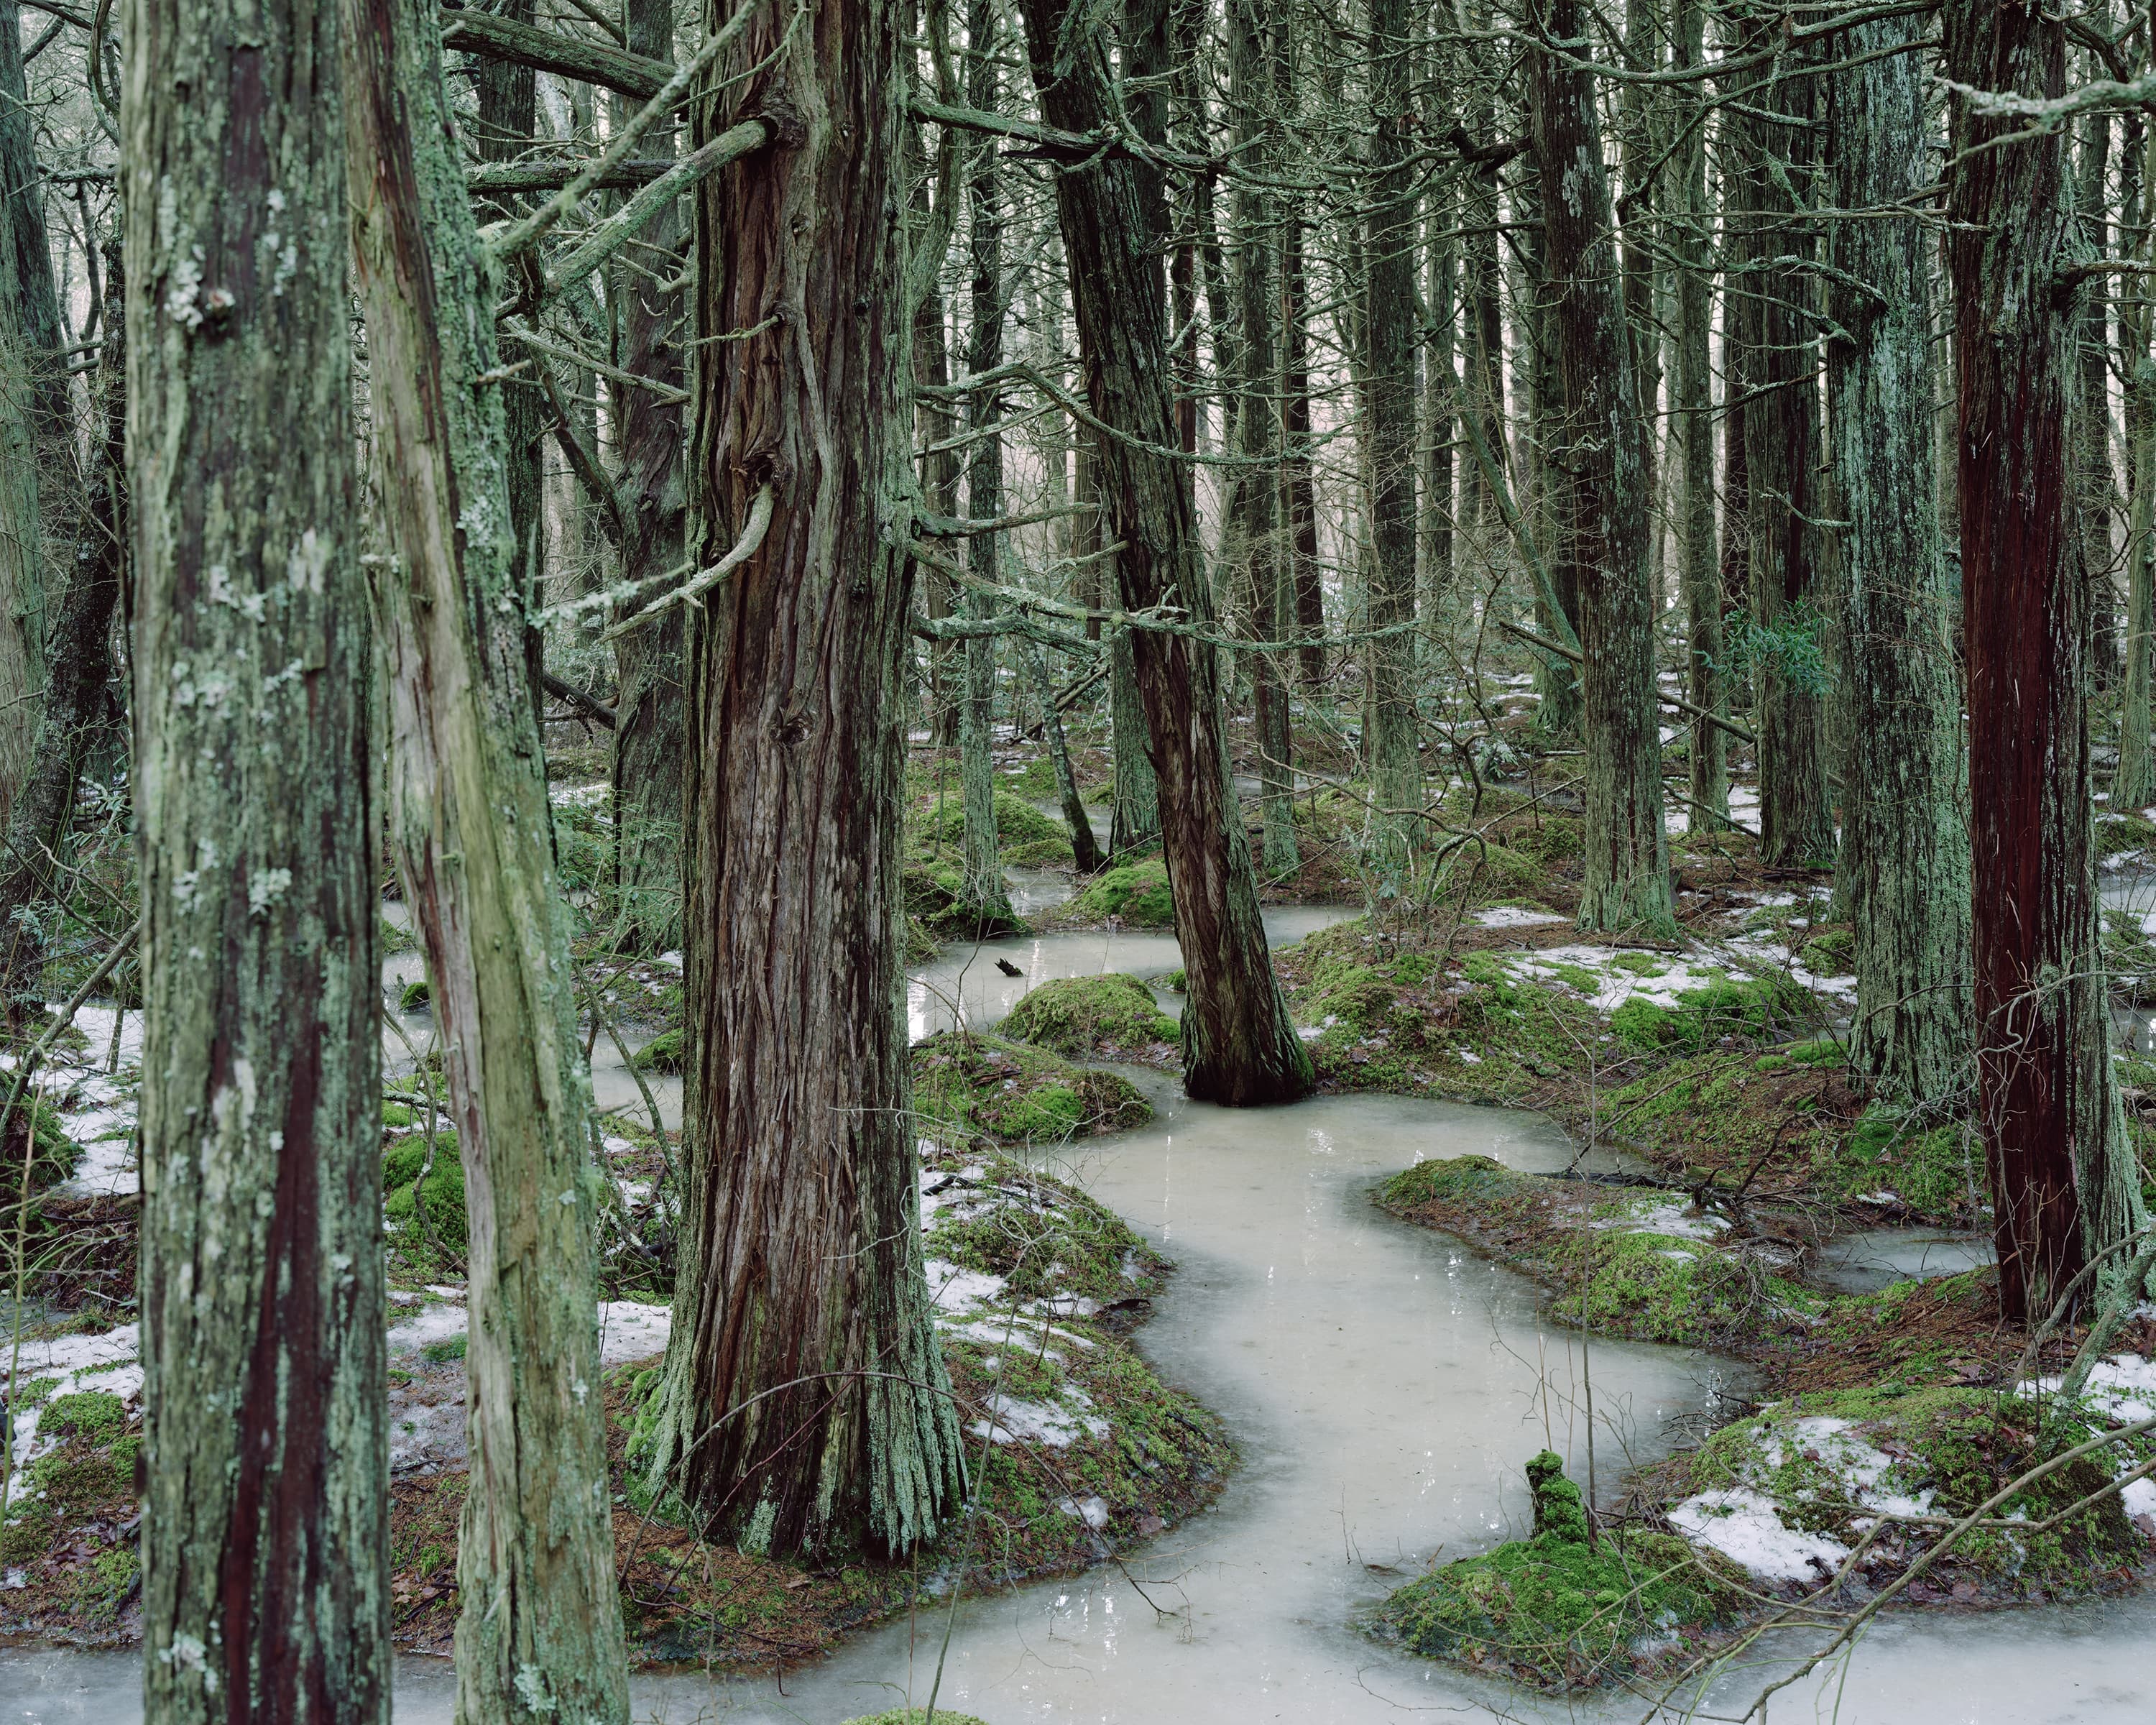 A frozen white cedar swamp, the green lichen on the trees and moss at their base remain green through the winter.